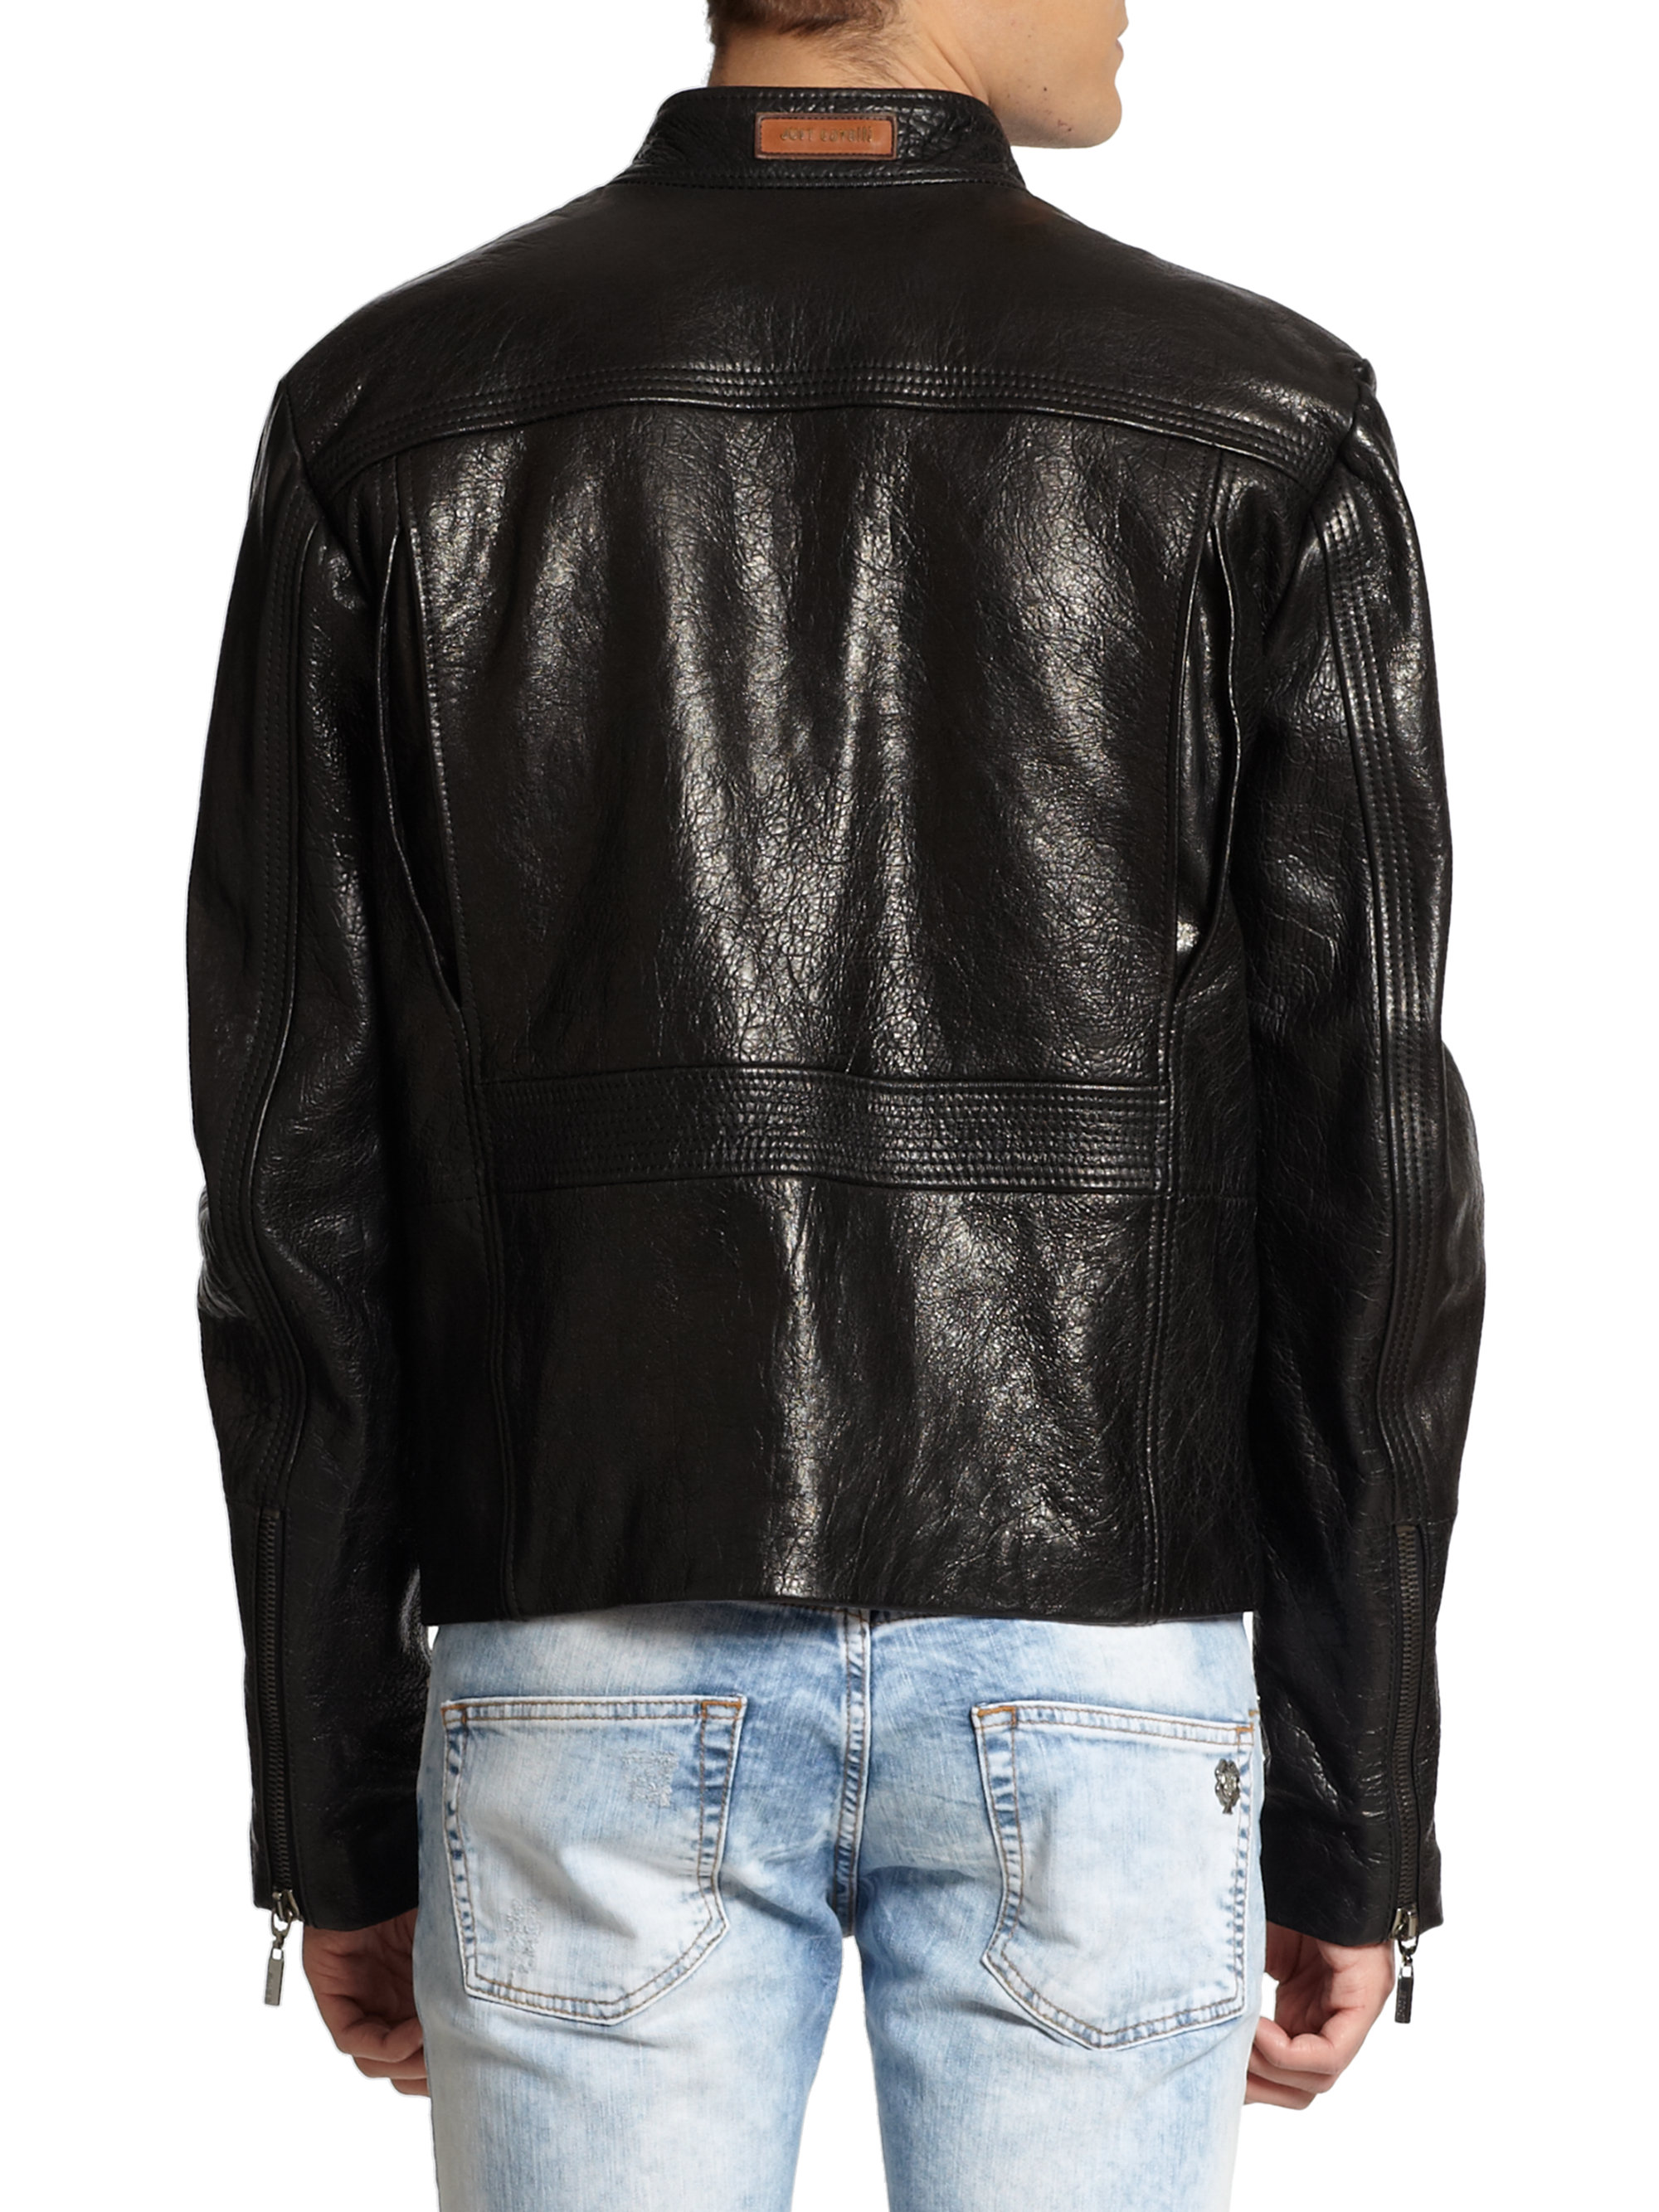 Lyst - Just Cavalli Pebbled Leather Zipfront Jacket in Black for Men